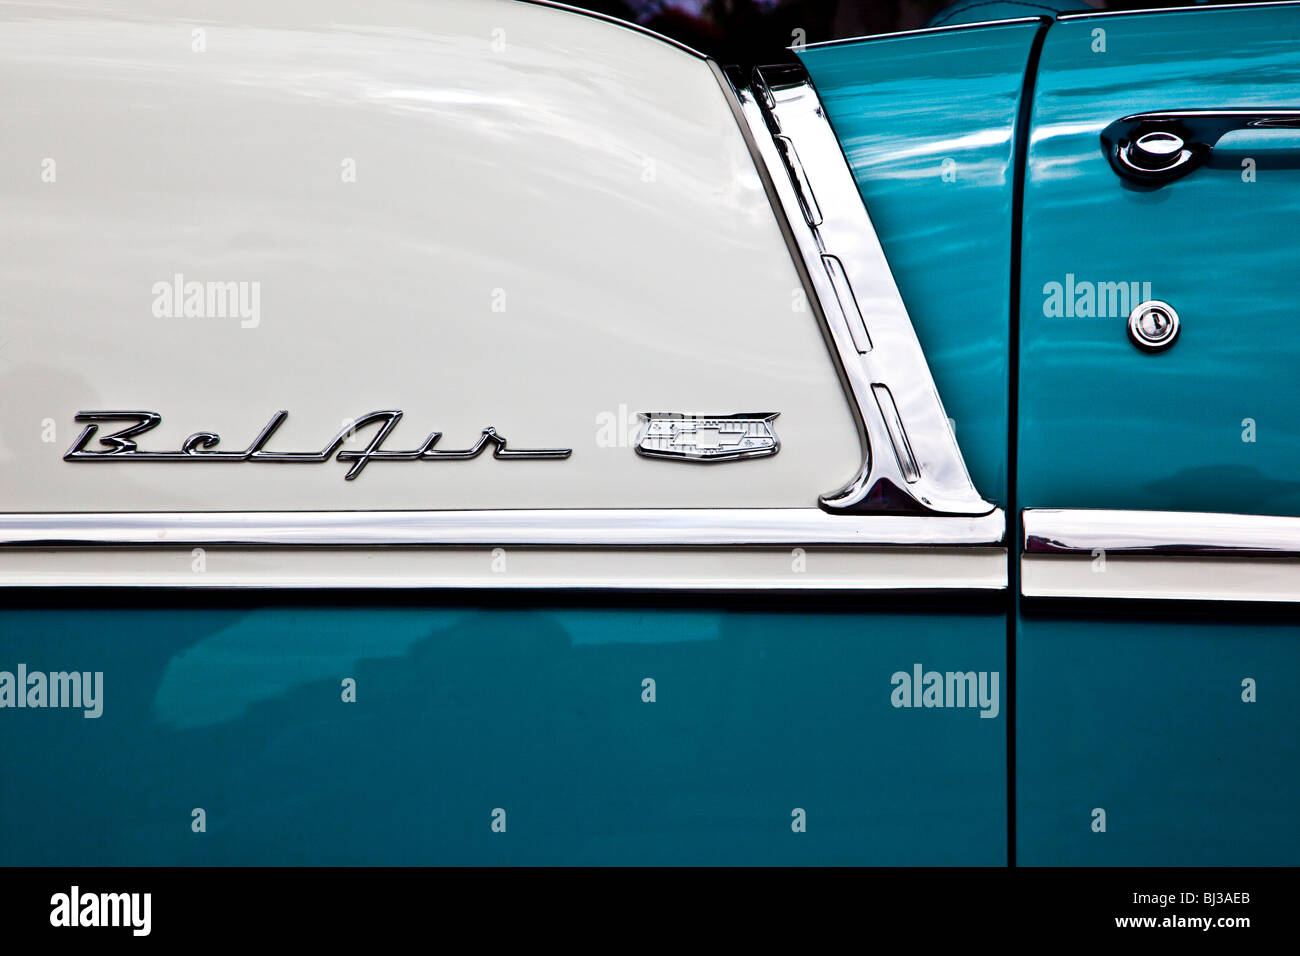 Bel Air in Turquoise Stock Photo